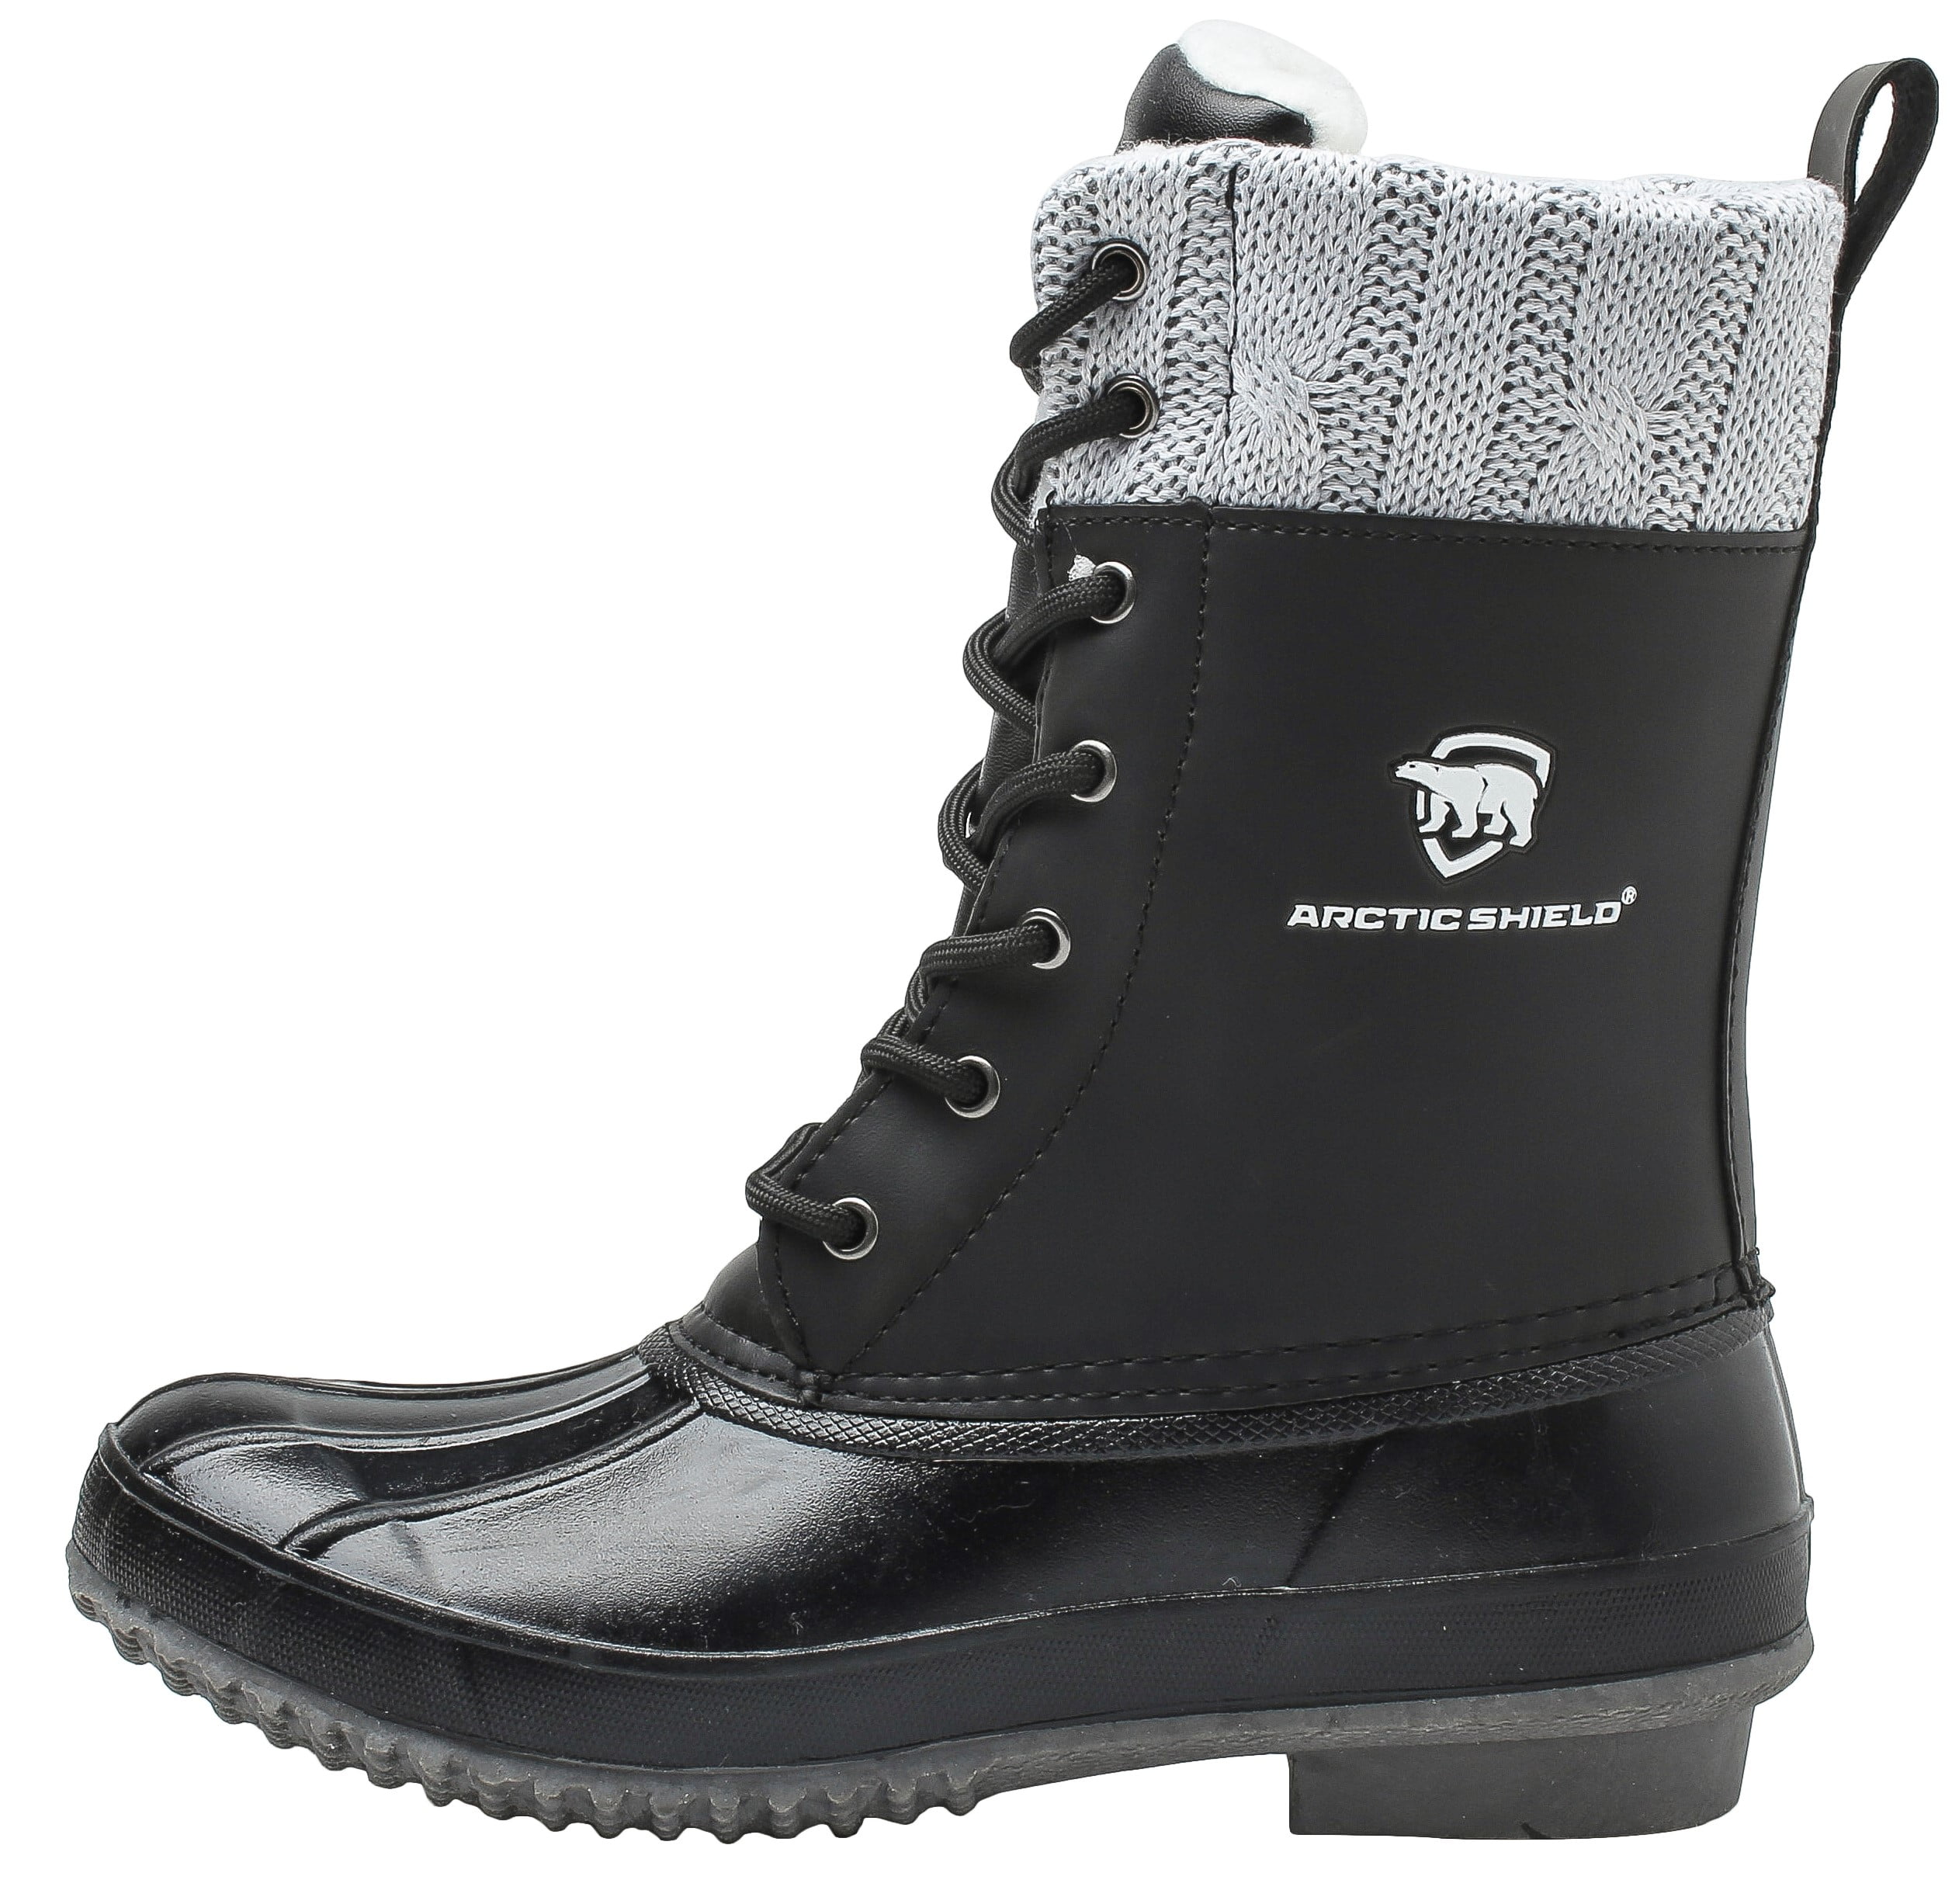 arctic shield duck boots